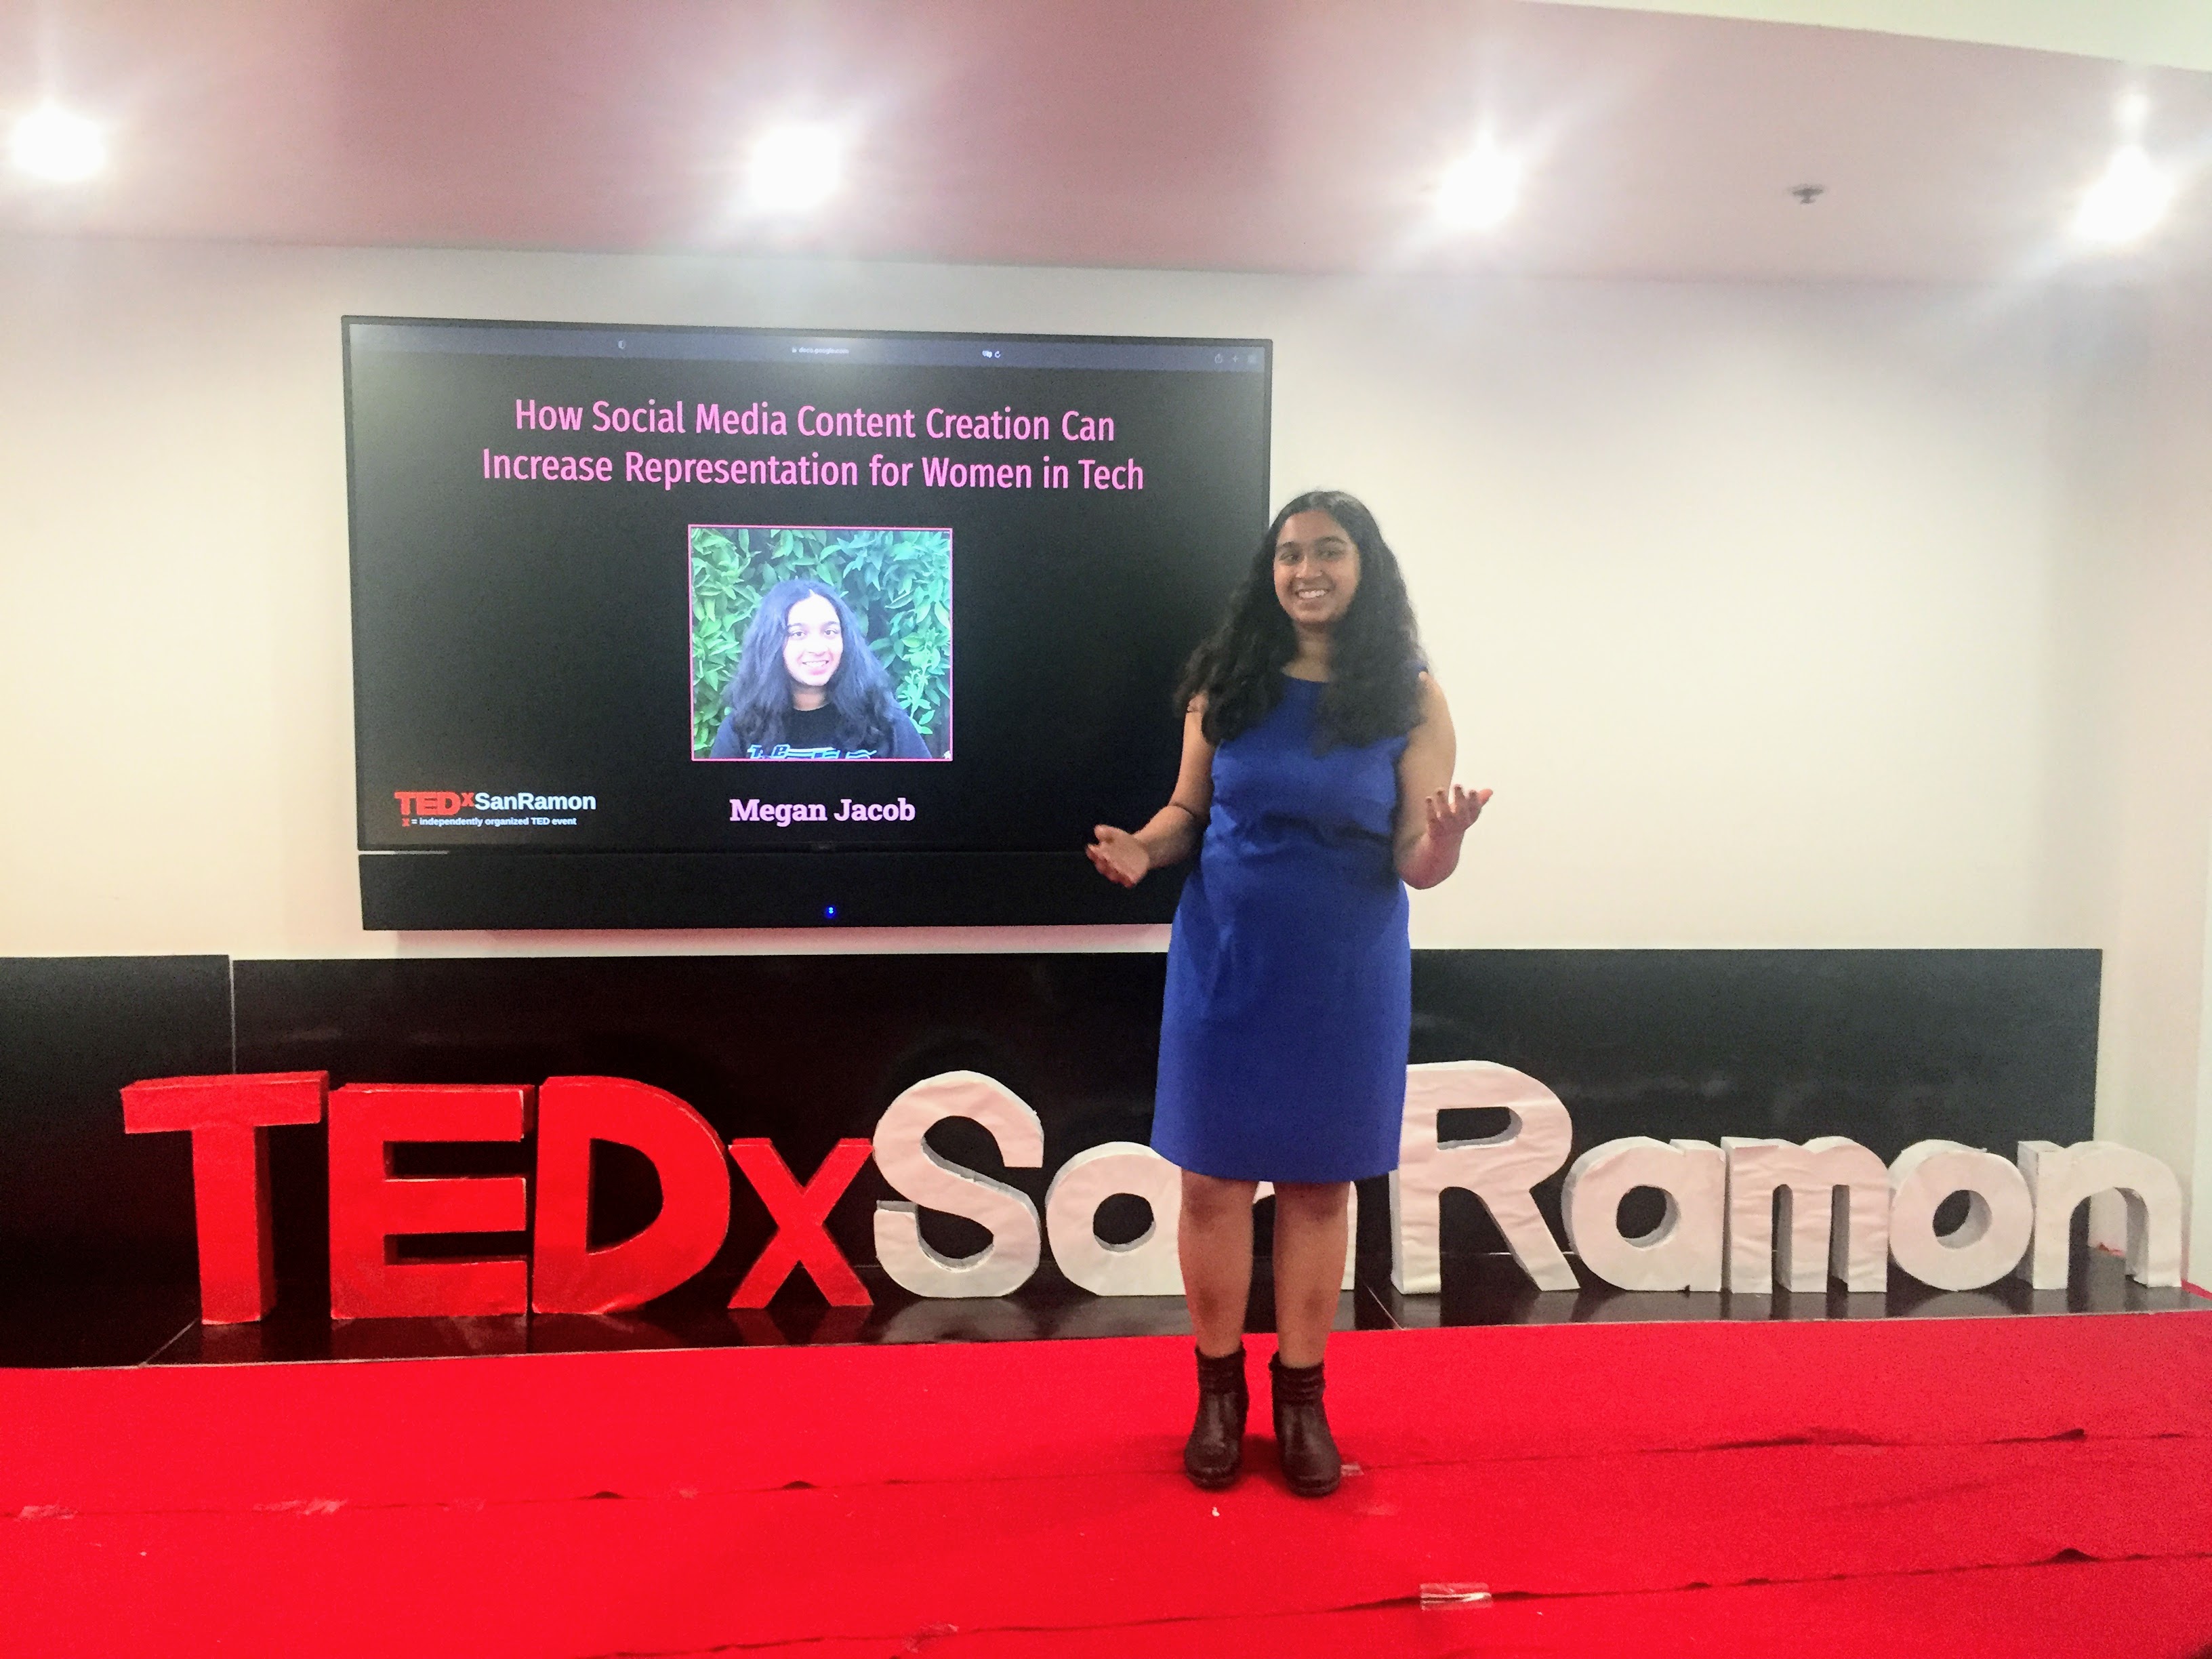 Gave a talk on women in STEM and social media representation at a local TedX event